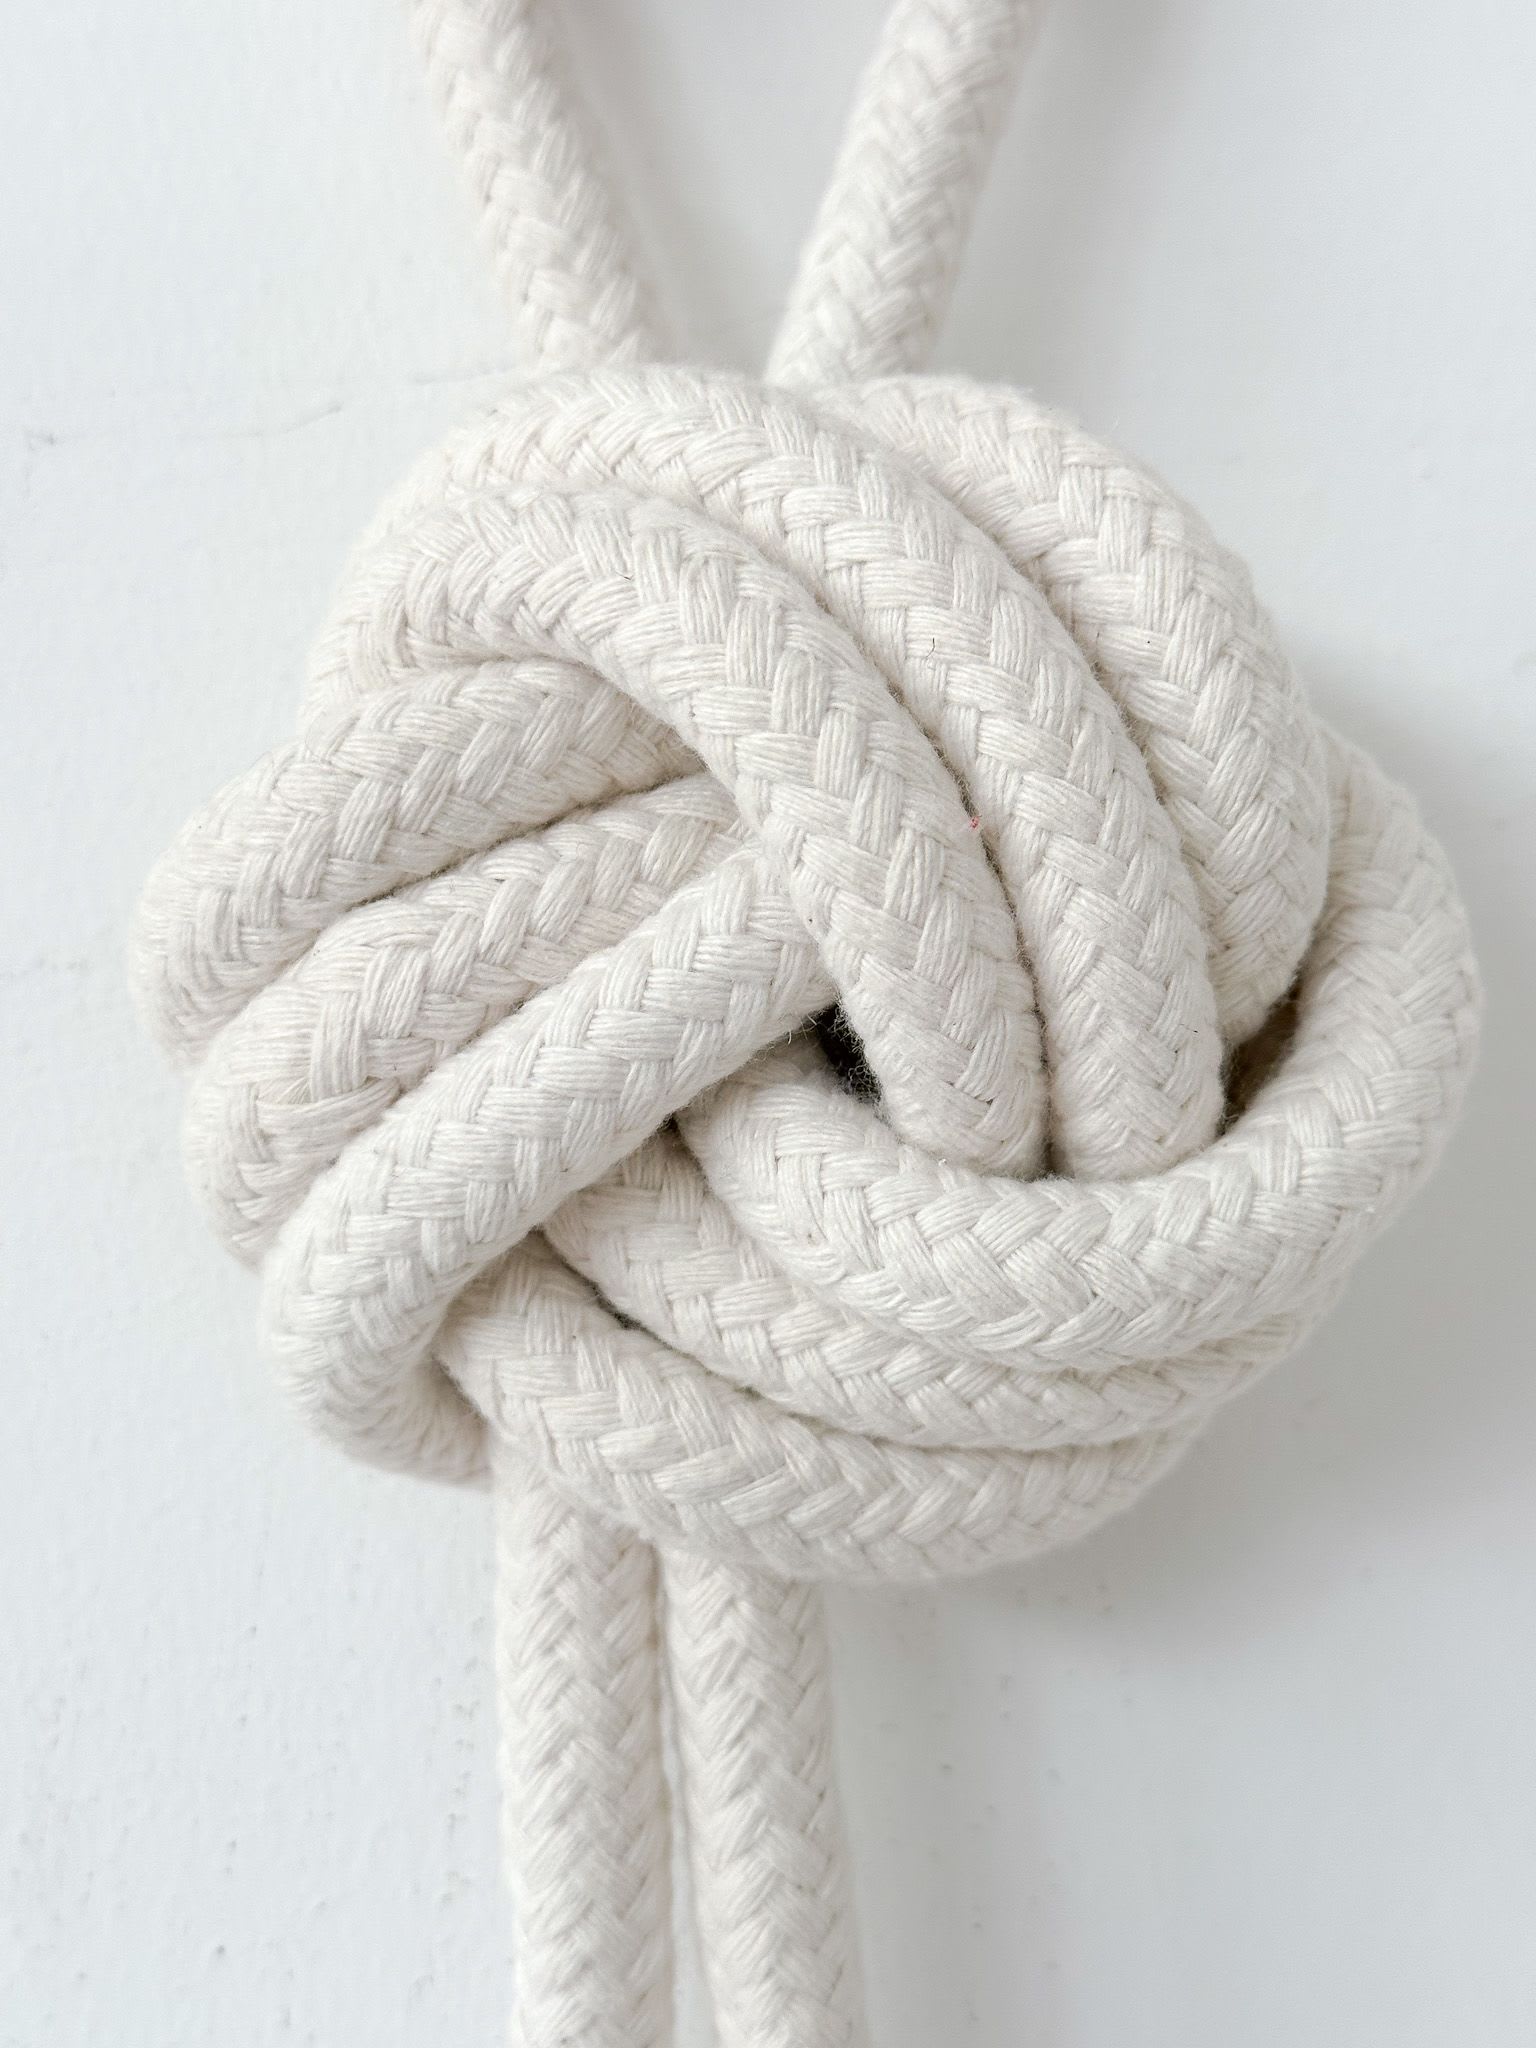 KNOT 001  Rope Sculpture Wall Hanging by Ana Salazar Atelier